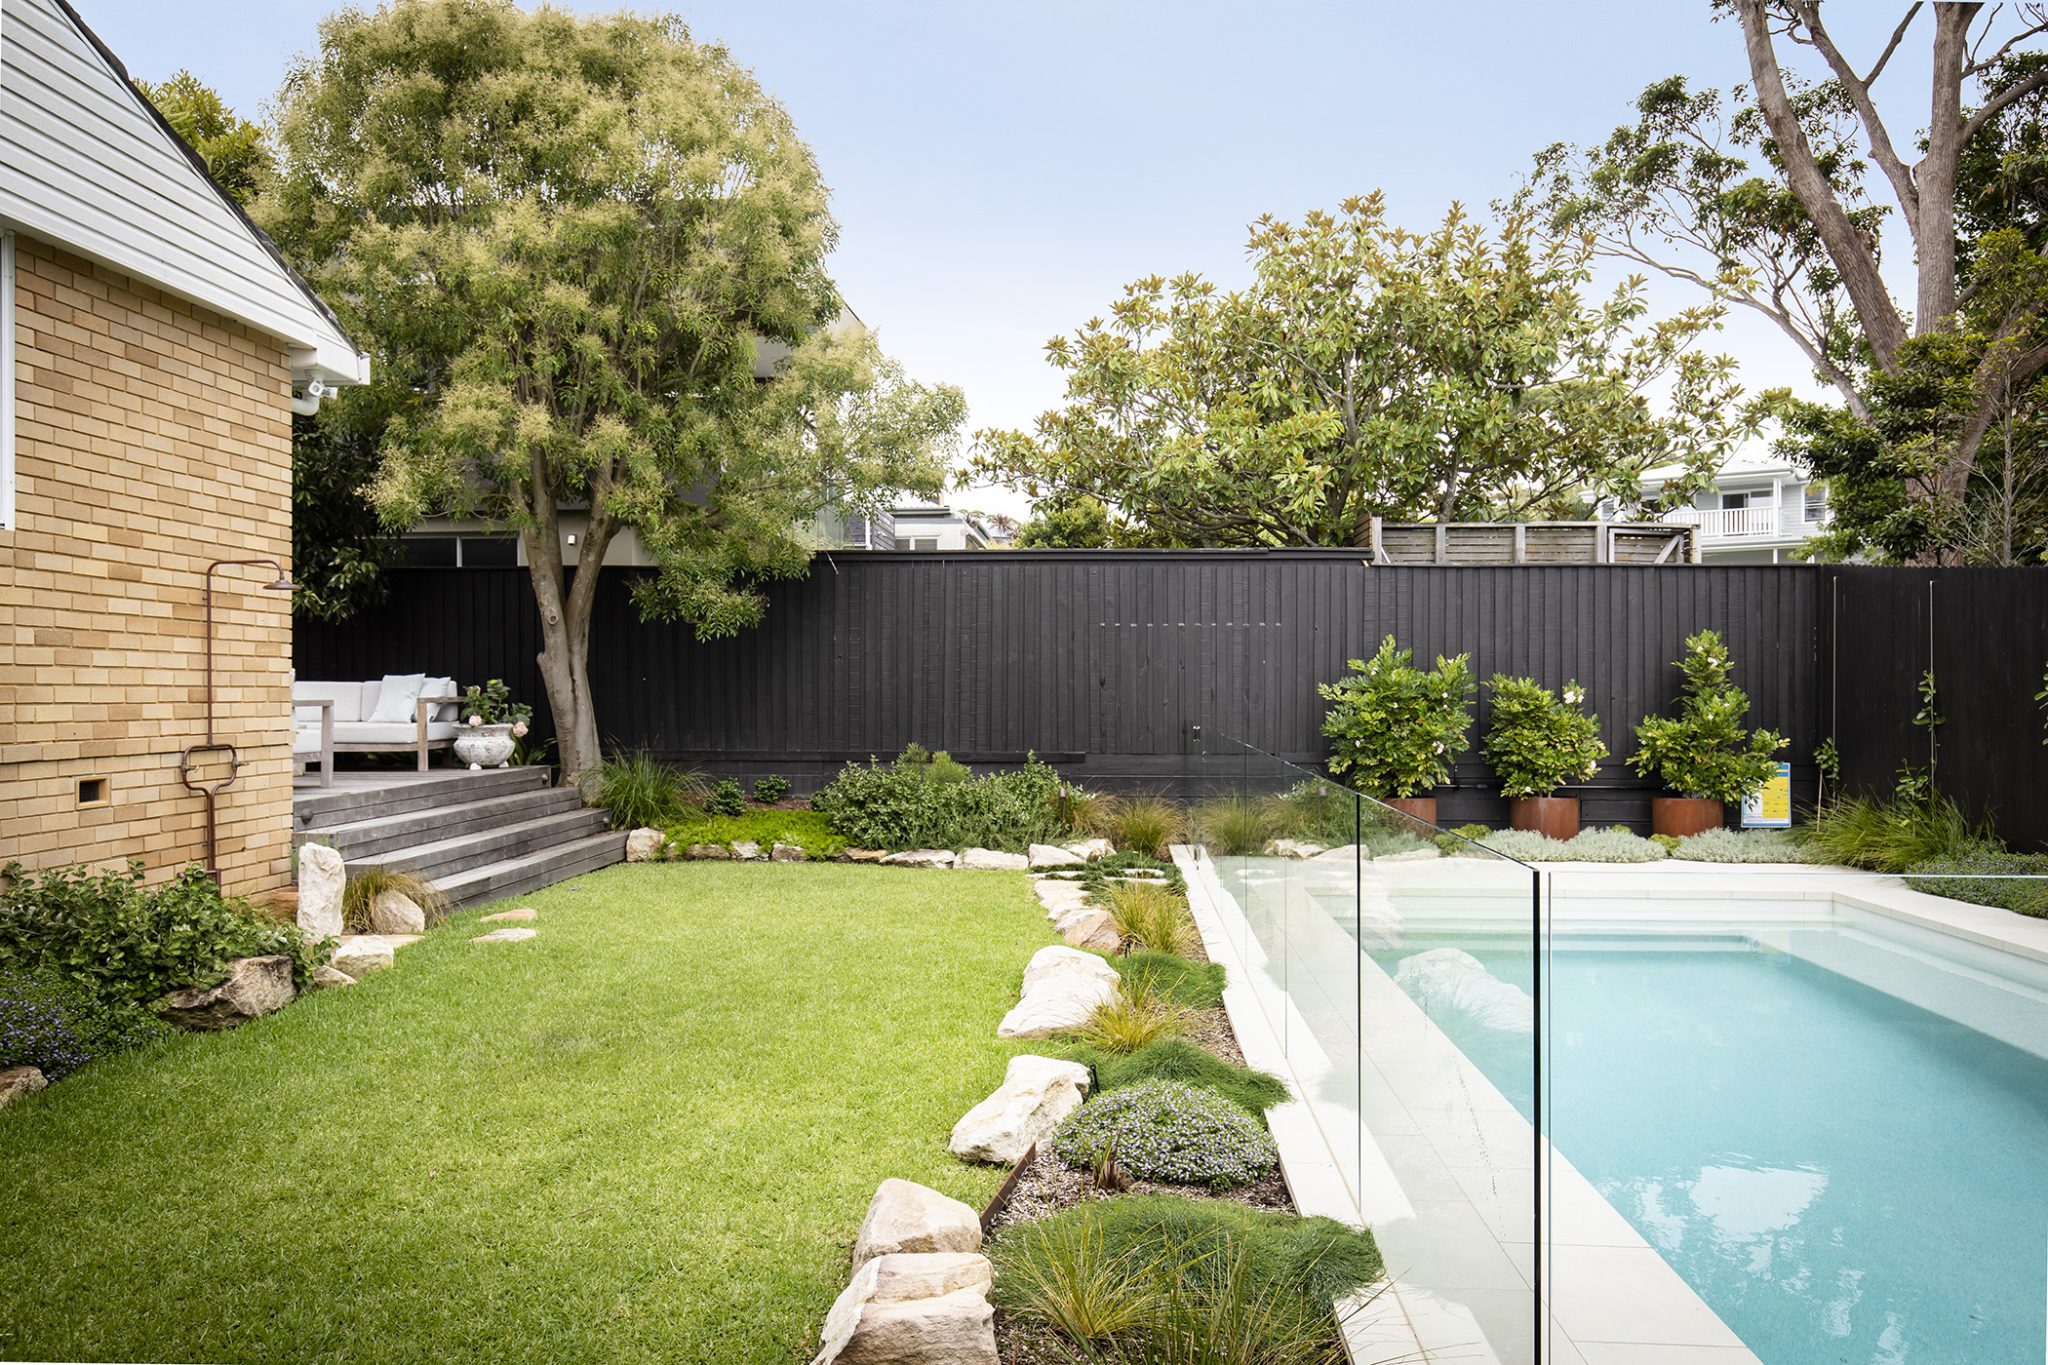 Renovated 1960s Home with Pool and Yard